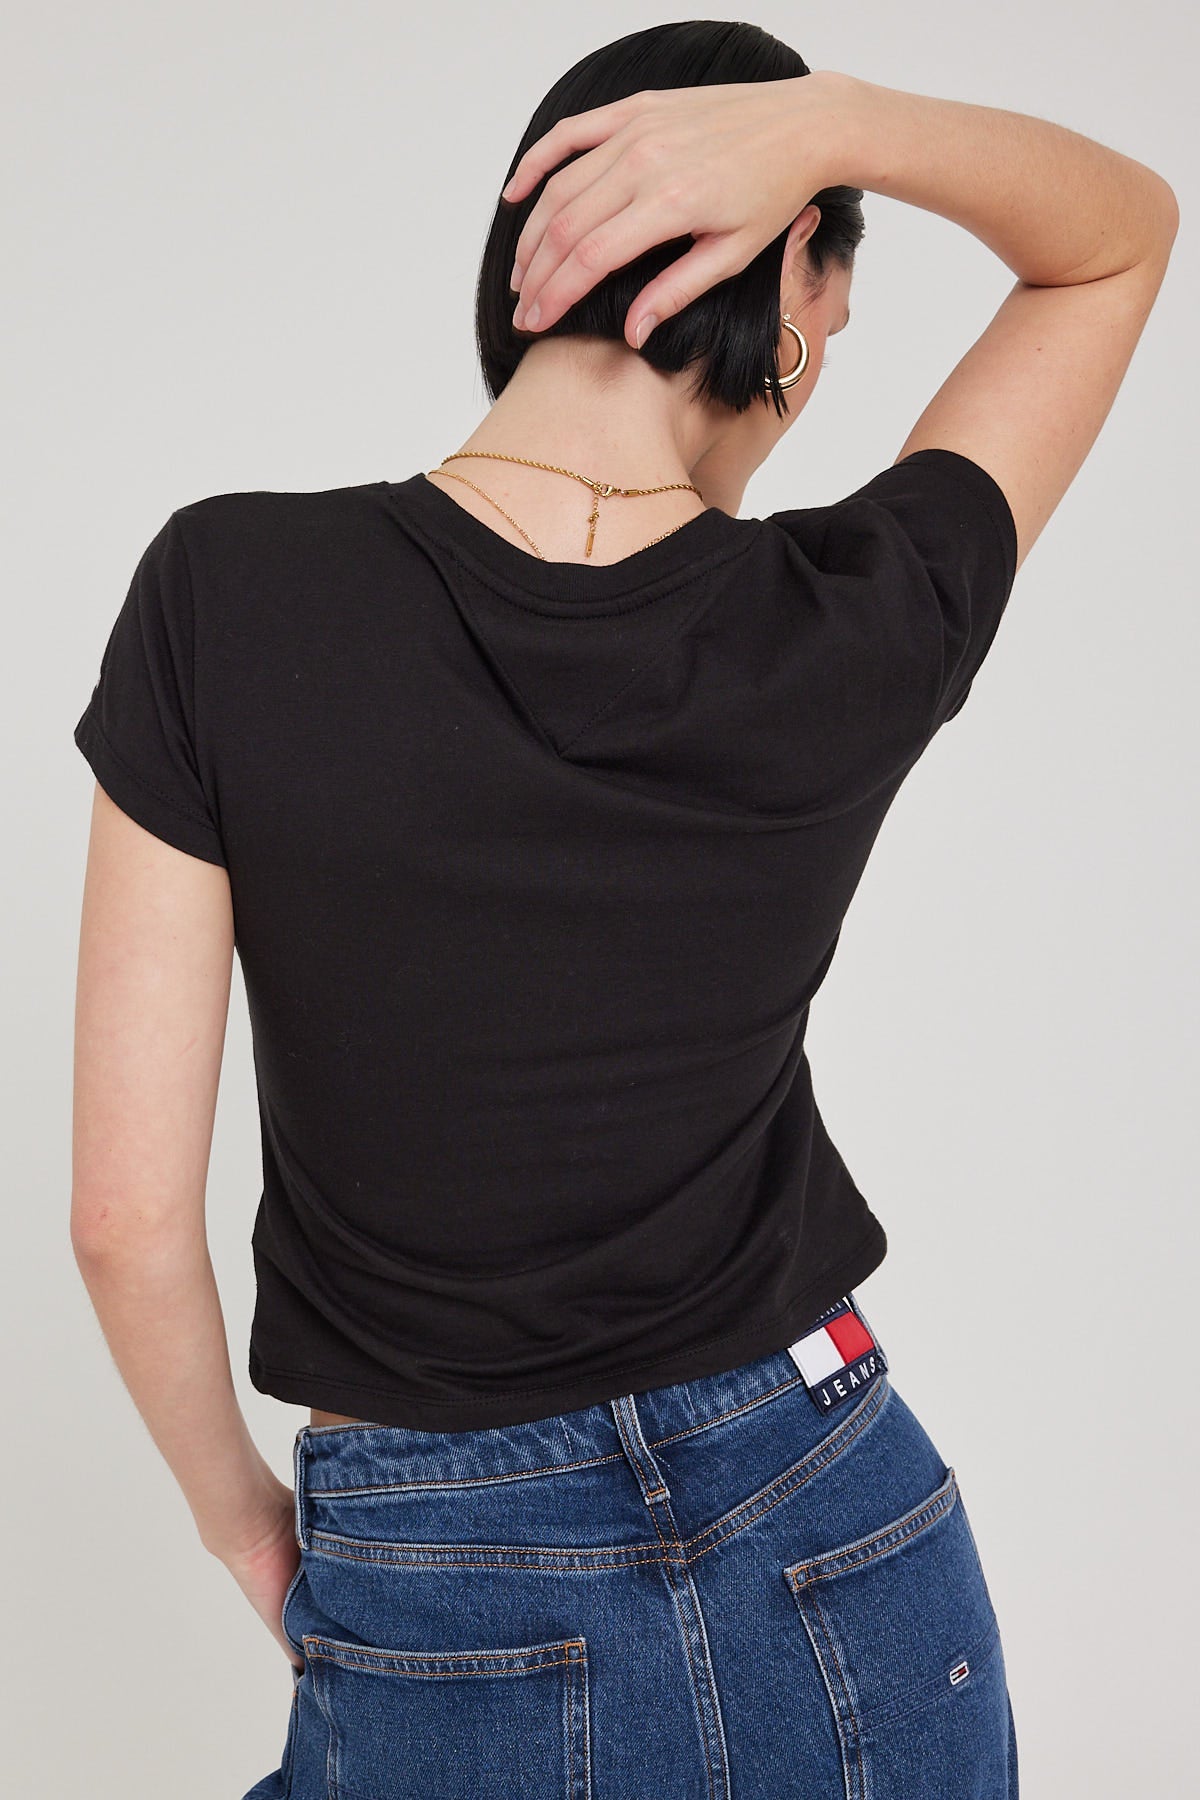 Tommy Jeans BABY ESSENTIAL LOGO 2 TEE BLACK